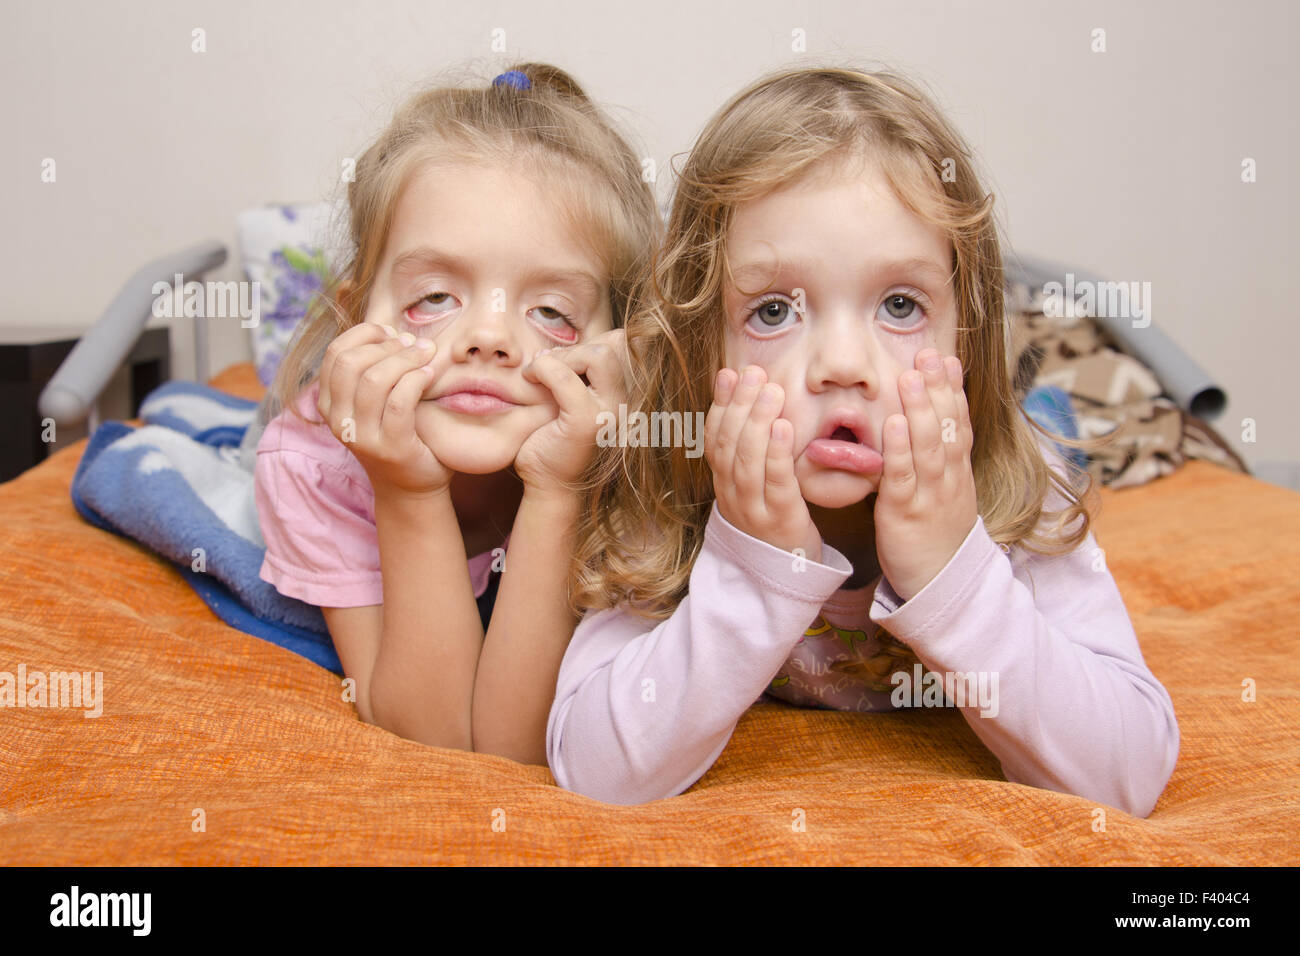 two girls pulled a terrible faces Stock Photo